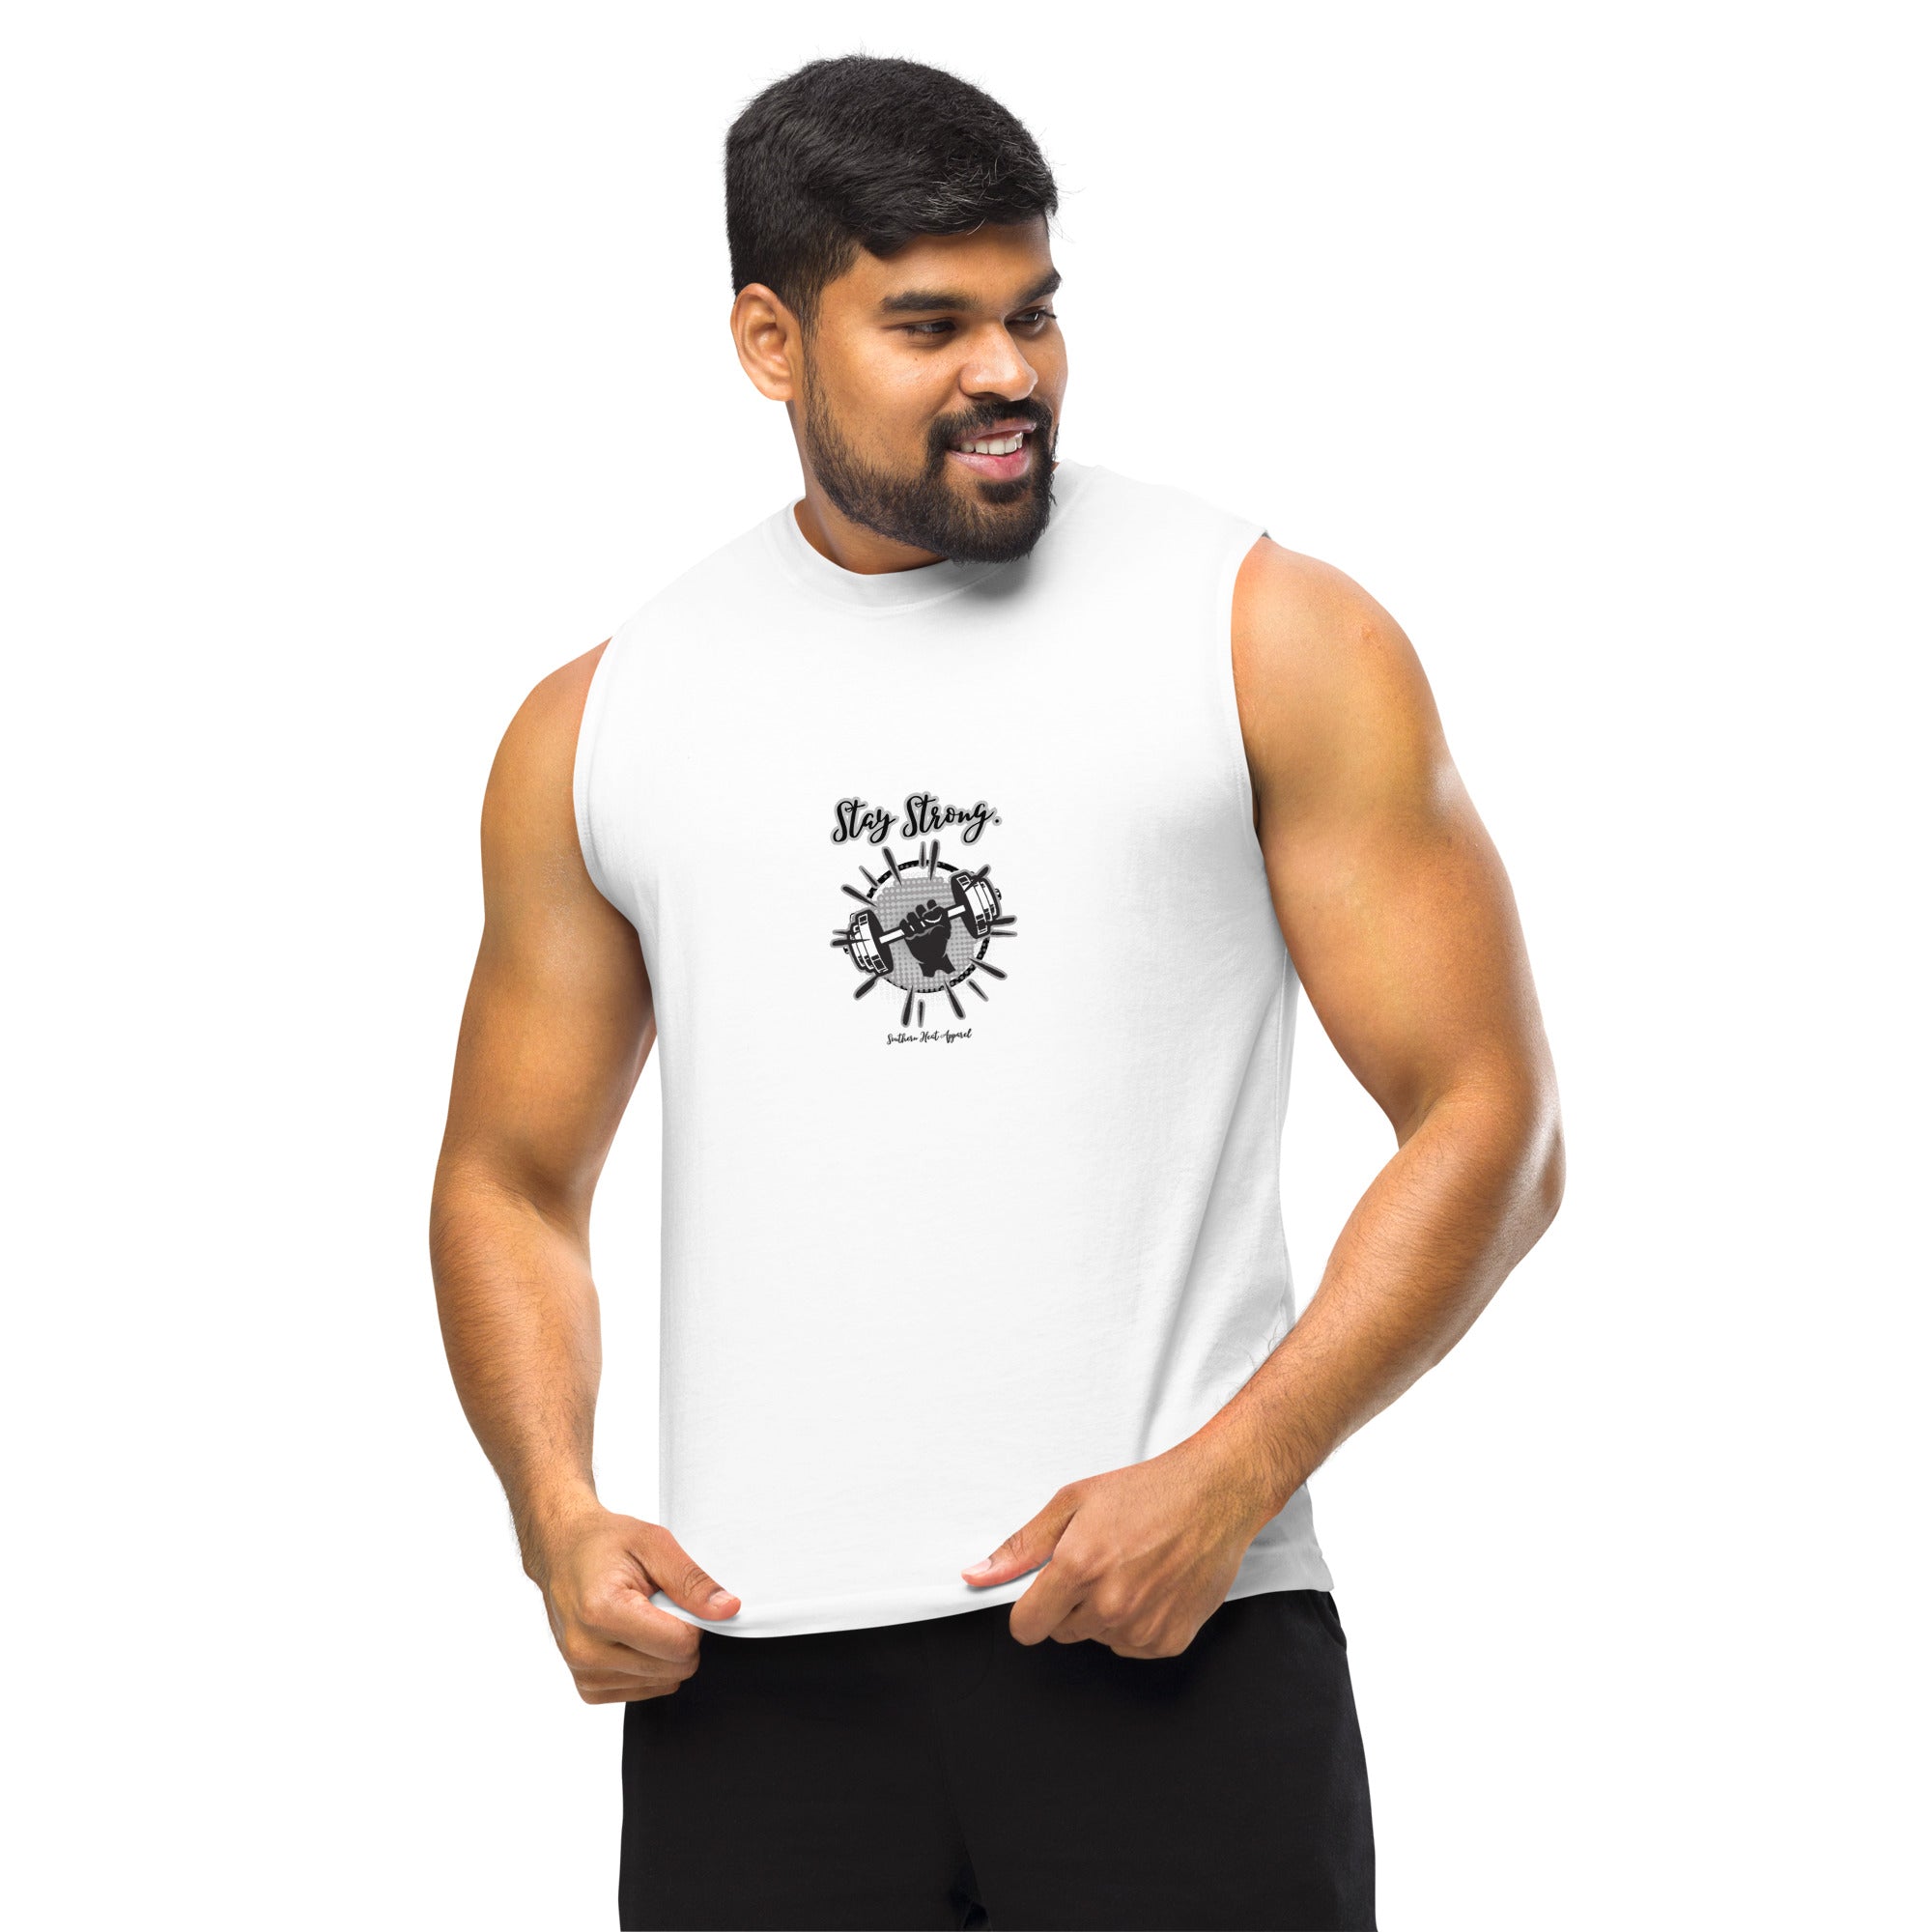 Stay strong-Mens Muscle Shirt